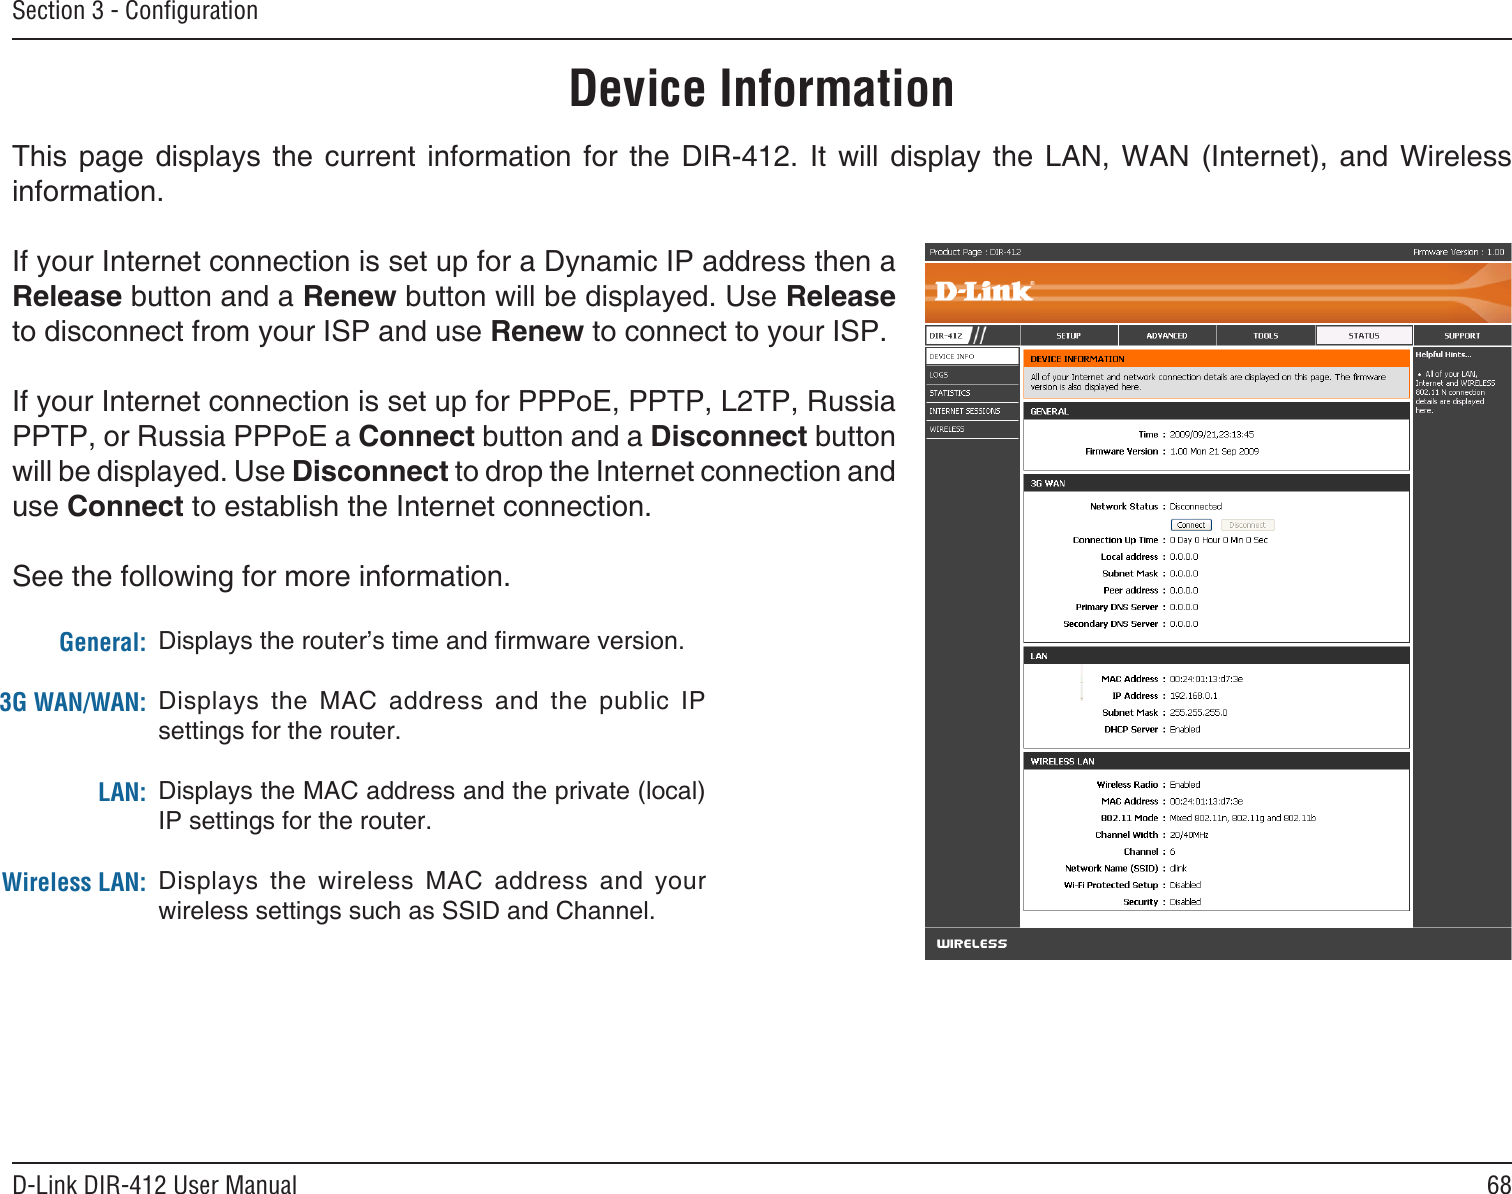 68D-Link DIR-412 User ManualSection 3 - ConﬁgurationThis  page  displays  the  current  information  for  the  DIR-412.  It  will  display  the  LAN,  WAN  (Internet),  and  Wireless information.If your Internet connection is set up for a Dynamic IP address then a Release button and a Renew button will be displayed. Use Release to disconnect from your ISP and use Renew to connect to your ISP. If your Internet connection is set up for PPPoE, PPTP, L2TP, Russia PPTP, or Russia PPPoE a Connect button and a Disconnect button will be displayed. Use Disconnect to drop the Internet connection and use Connect to establish the Internet connection.See the following for more information.Device InformationGeneral:3G WAN/WAN:LAN:Wireless LAN:Displays the router’s time and rmware version.Displays  the  MAC  address  and  the  public  IP settings for the router.Displays the MAC address and the private (local) IP settings for the router.Displays  the  wireless  MAC  address  and  your wireless settings such as SSID and Channel.